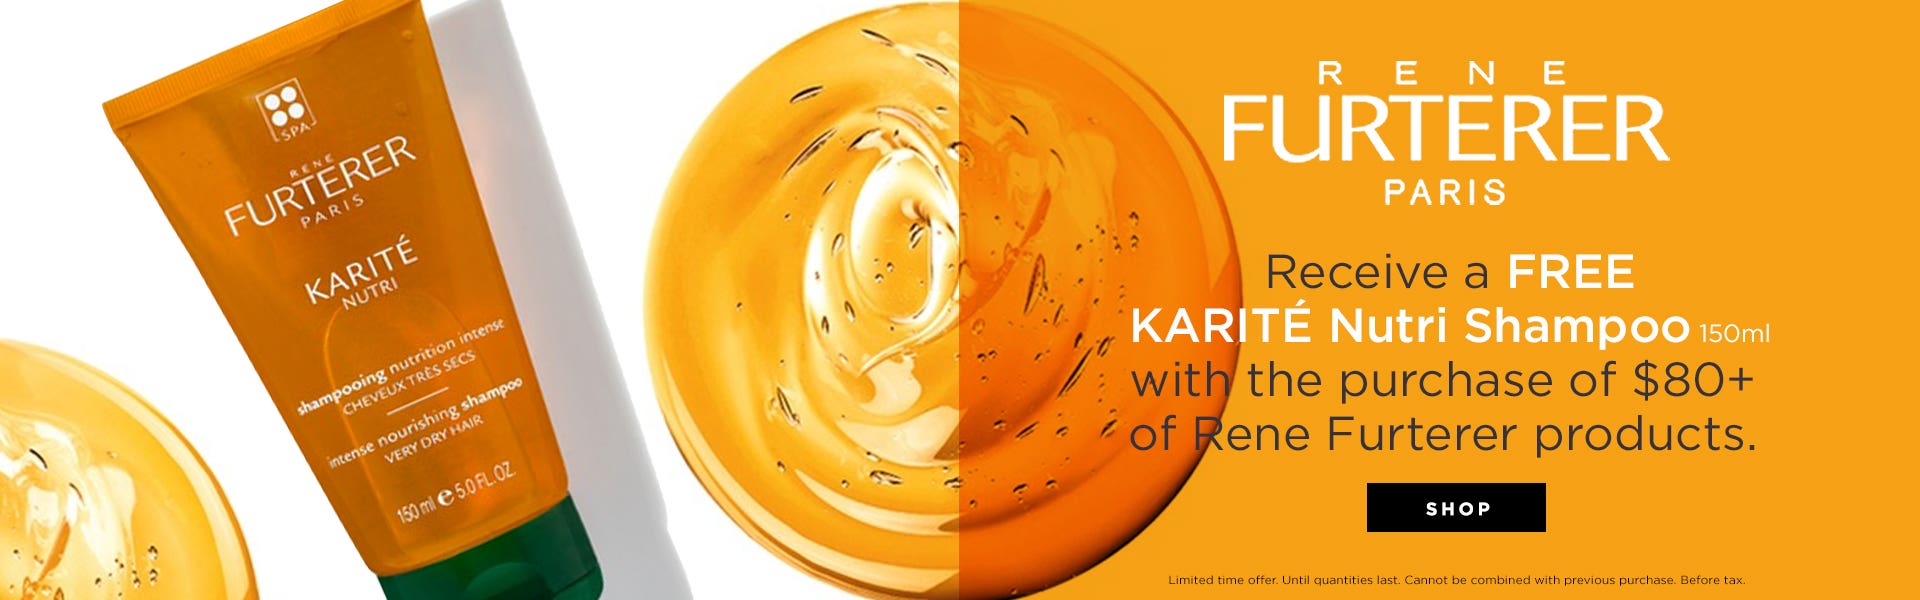 Receive a FREE KARITÉ Nutri Shampoo with the purchase of $80+ of Rene Furterer products